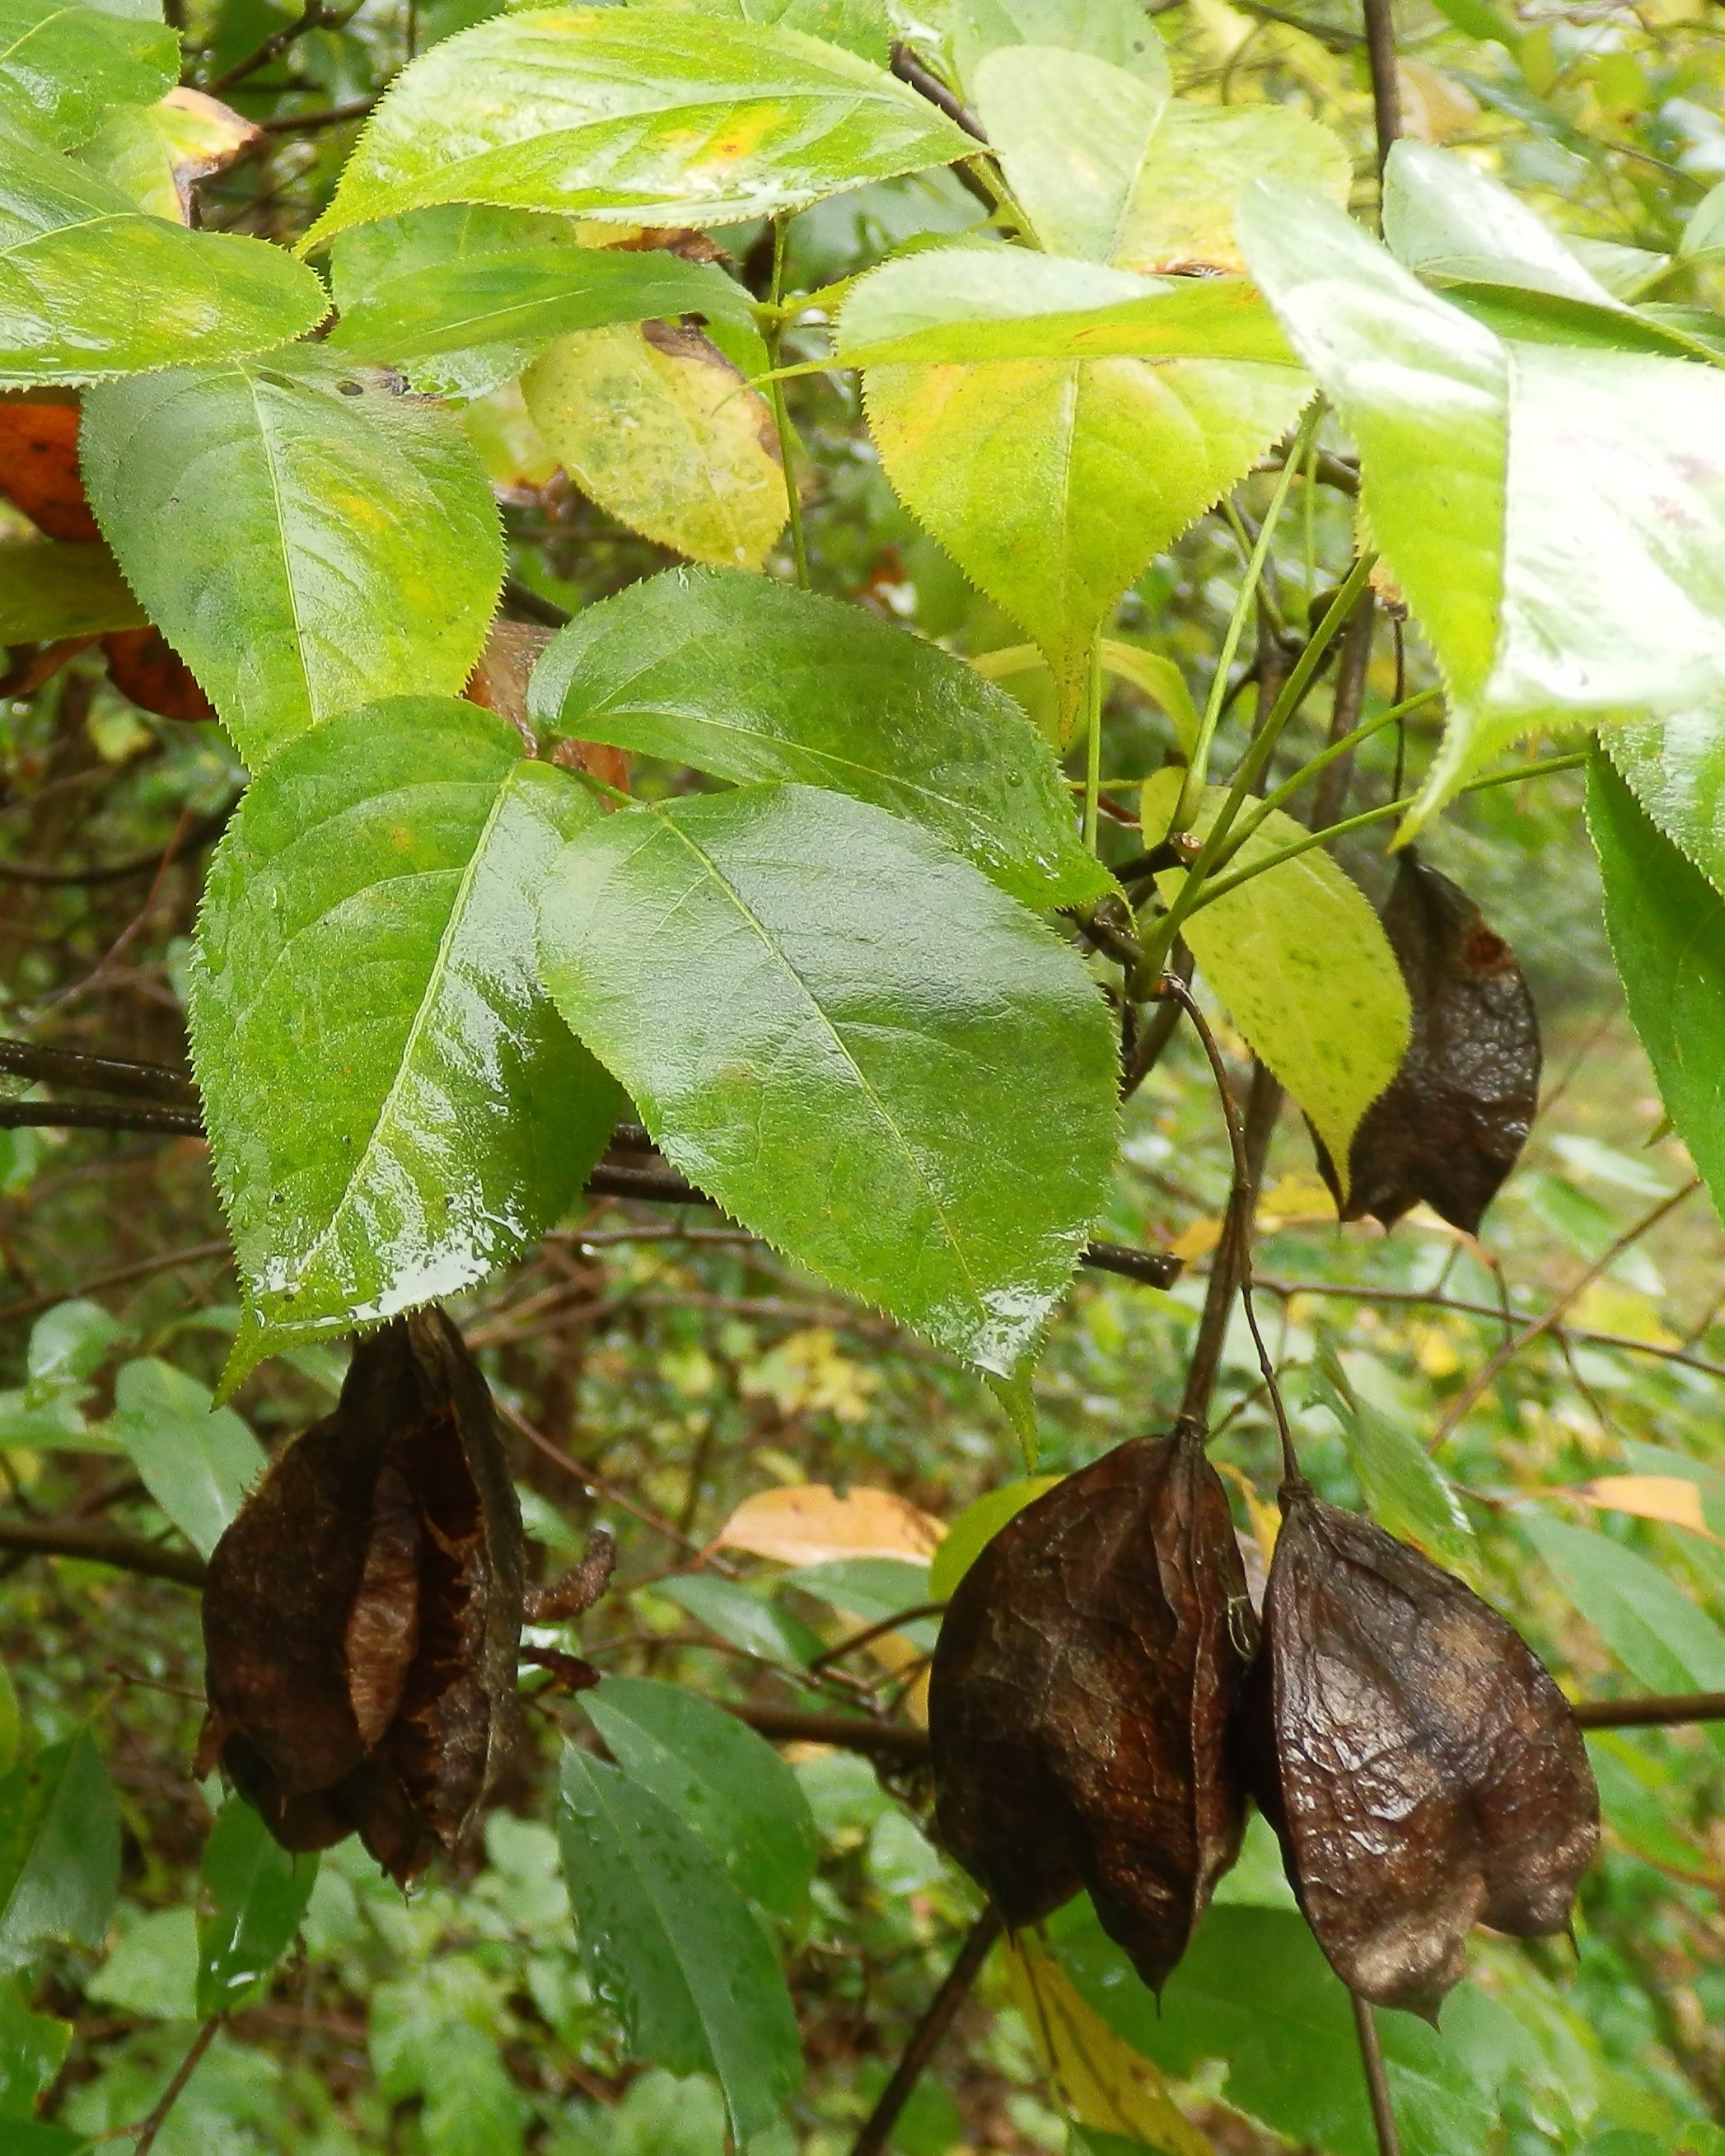 The Scientific Name is Staphylea trifolia. You will likely hear them called Bladdernut, American Bladdernut. This picture shows the Fruit is a papery pod with one seed per sac. of Staphylea trifolia